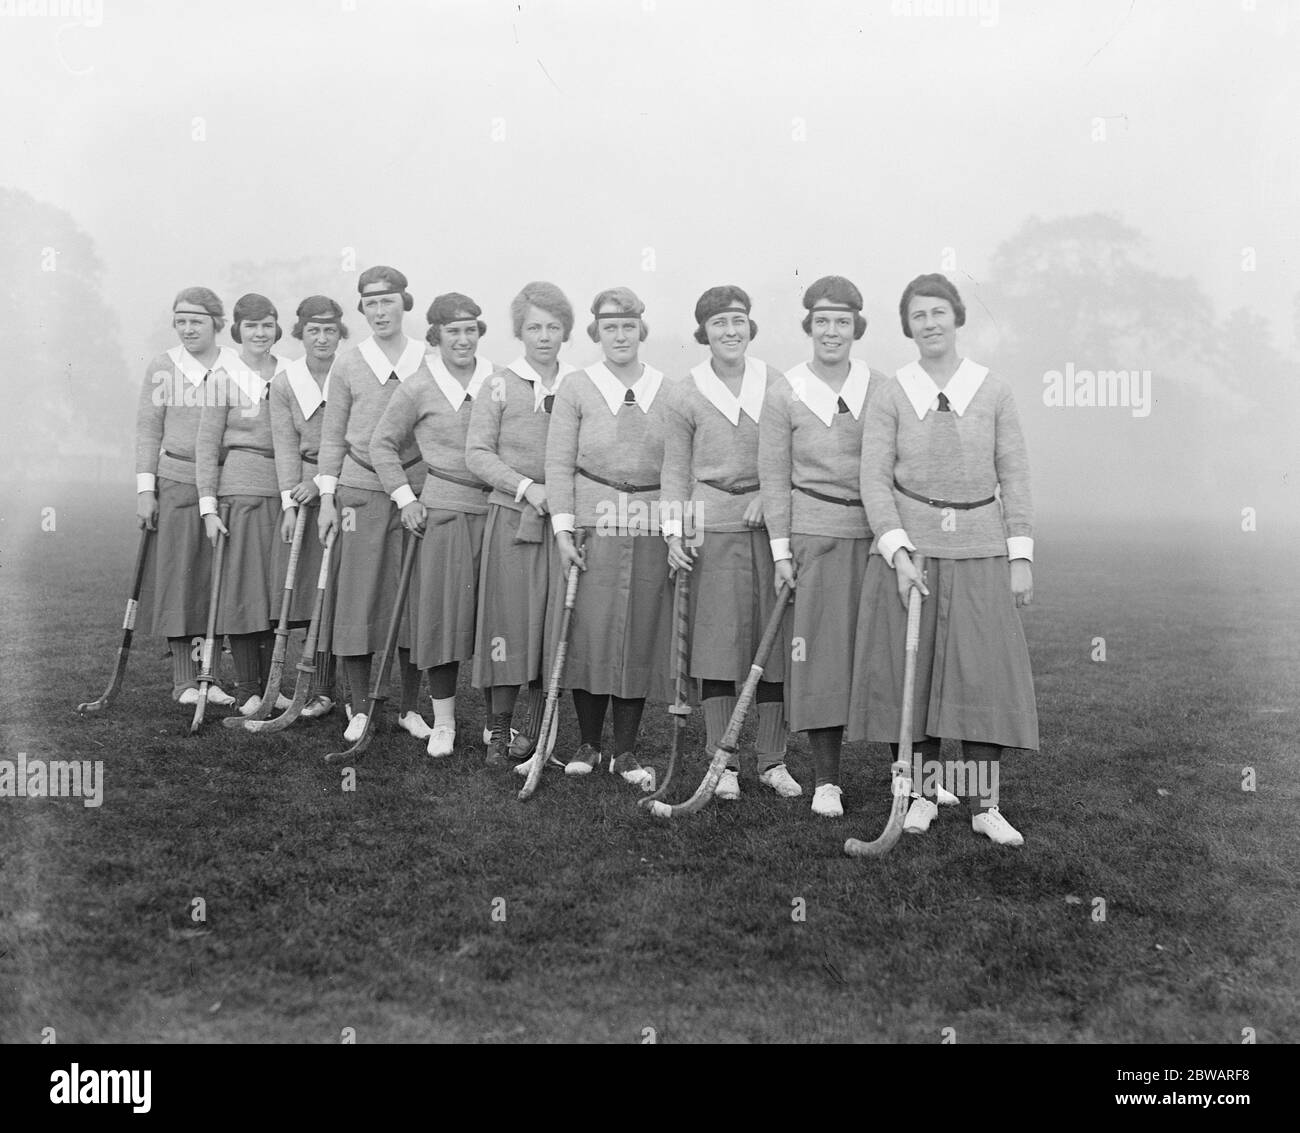 1920 - The first American women's field hockey team The All-Philadelphia team competed internationally. Their application to the 1920 Olympics in Antwerp was denied, but they played in an English tournament and lost both games Photo shows the America ' s lady ' s hockey players first match in England . 4 November 1920 Stock Photo